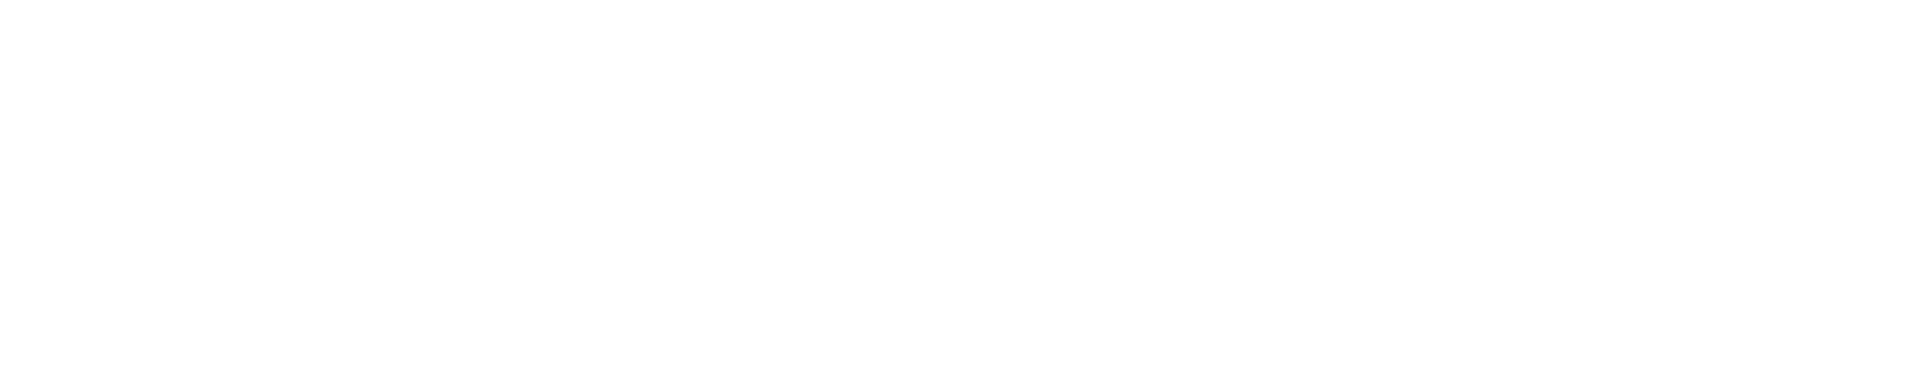 The logo of Higher Soul Consulting